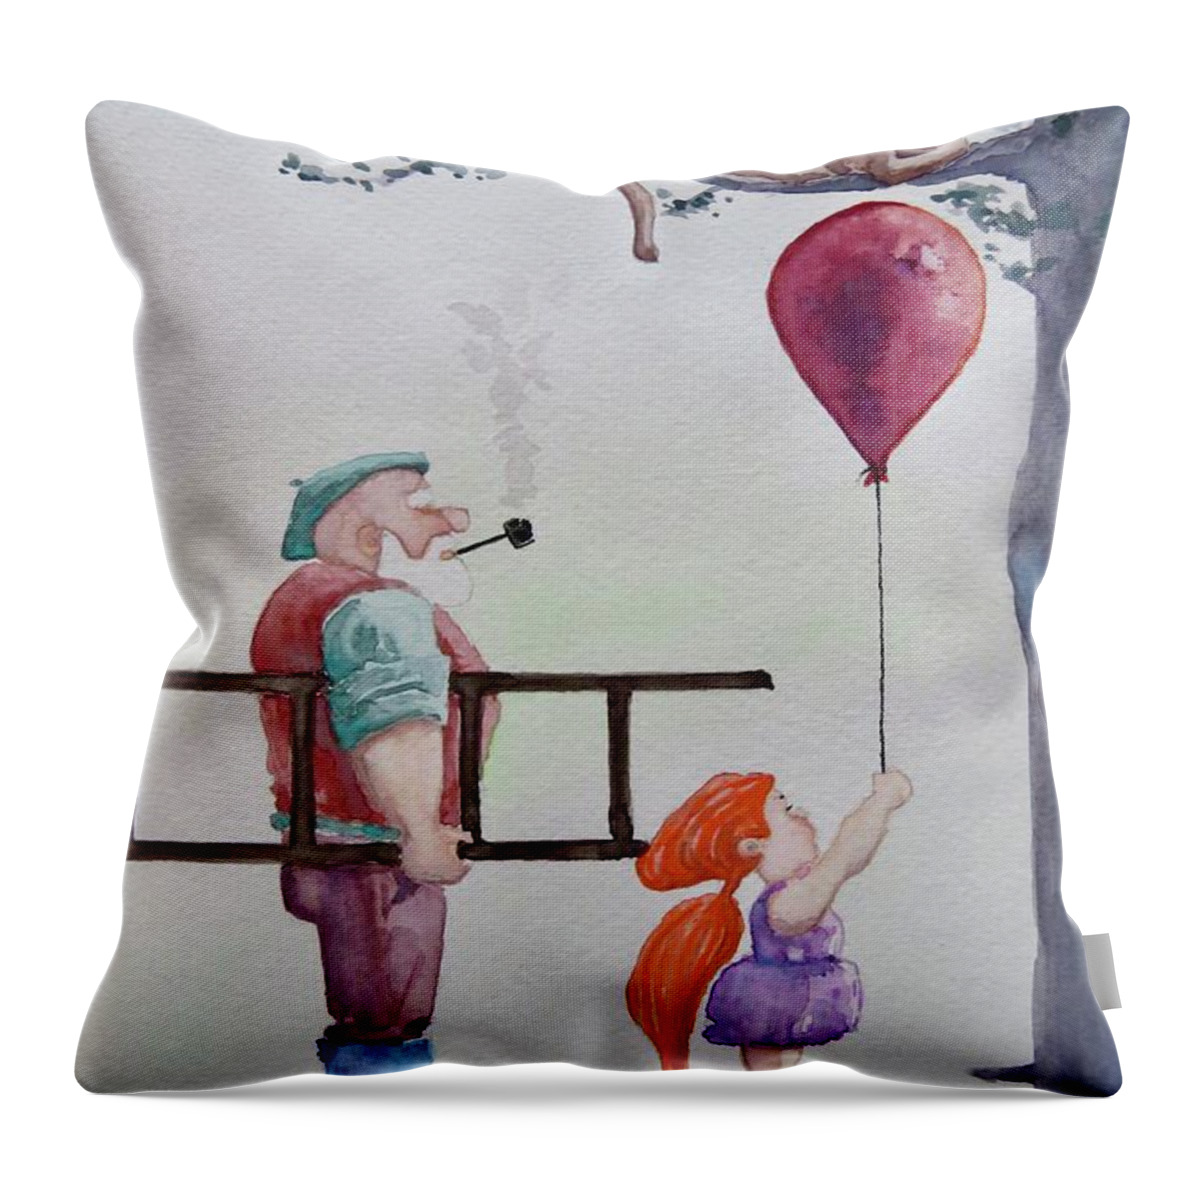  Painting Throw Pillow featuring the painting Take It Please by Geni Gorani